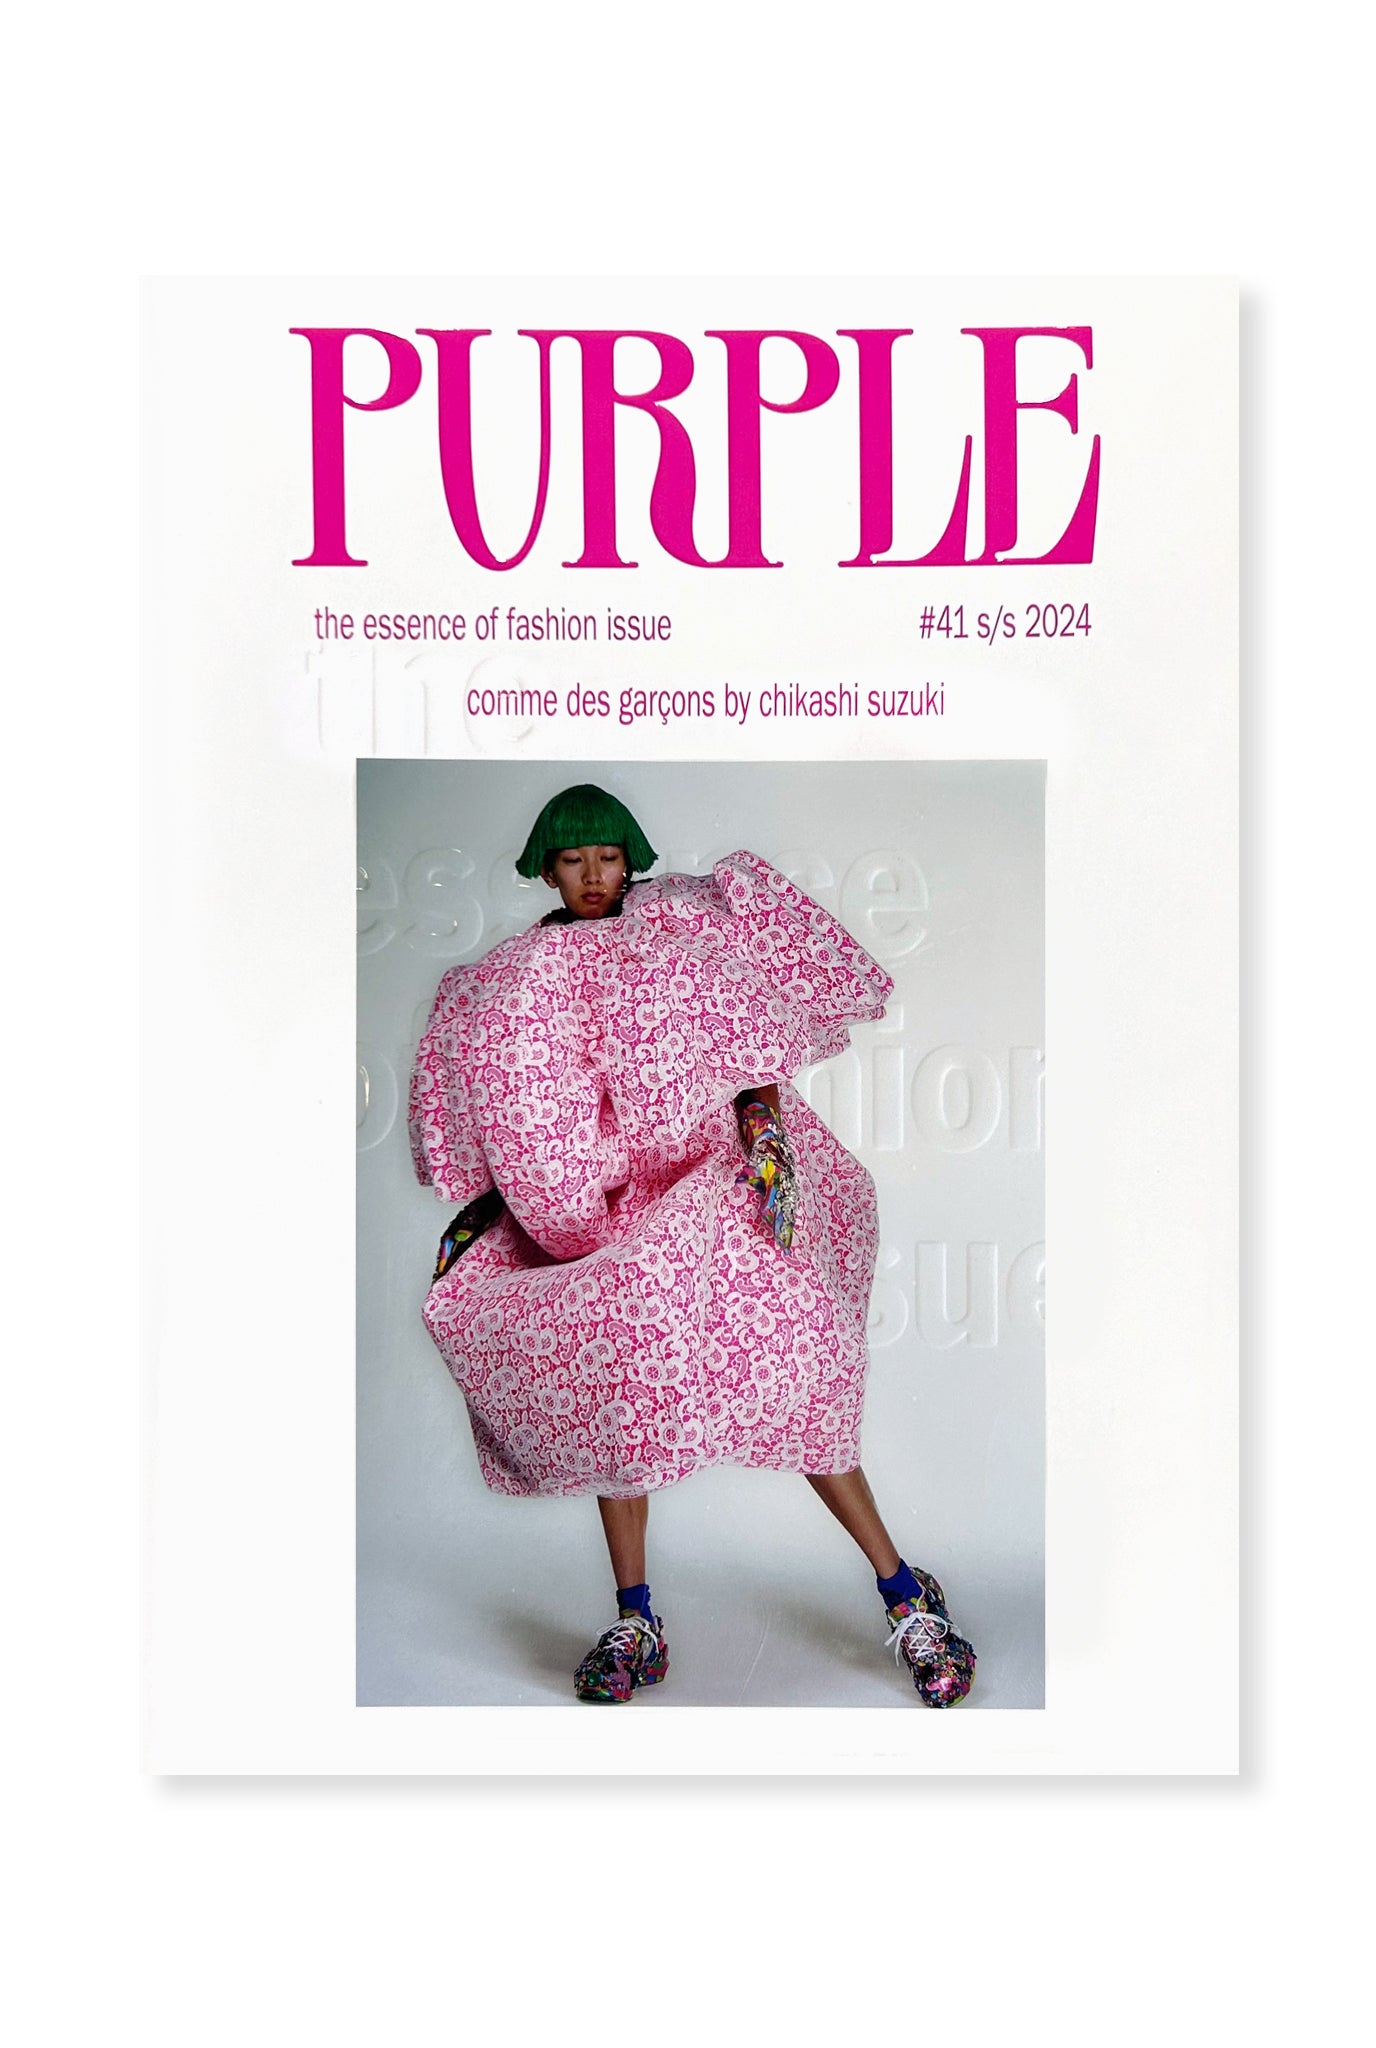 Purple, Issue 41 - The Essence of Fashion IssuePurple, Issue 41 - The Essence of Fashion Issue